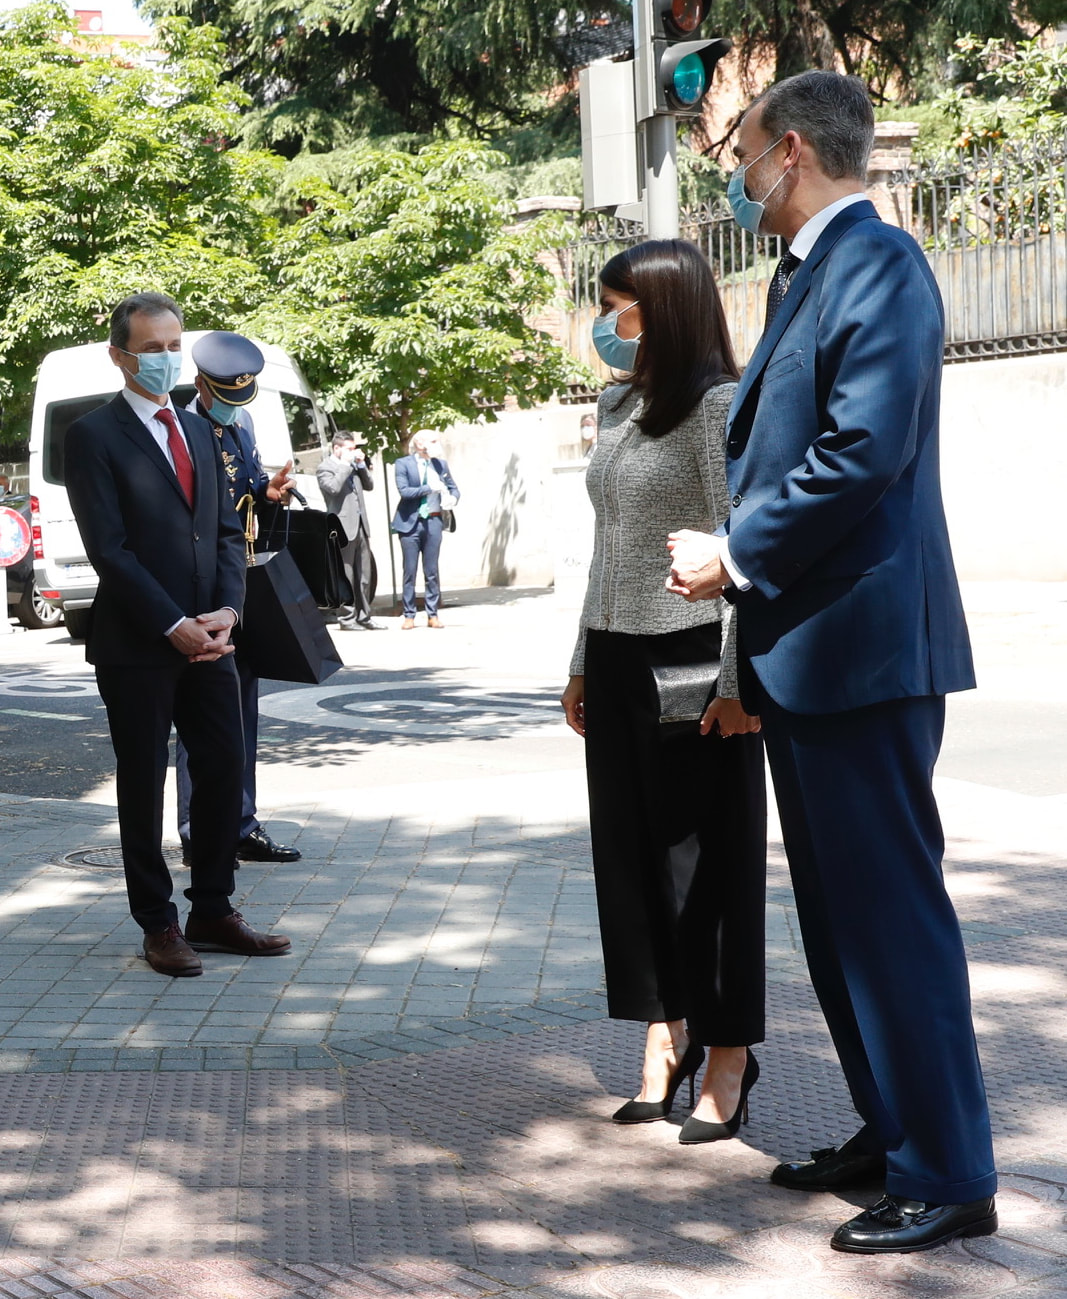 King Felipe VI and Queen Letizia of Spain arrive at the Elcano Royal Institute in Madrid on 25 May 2020